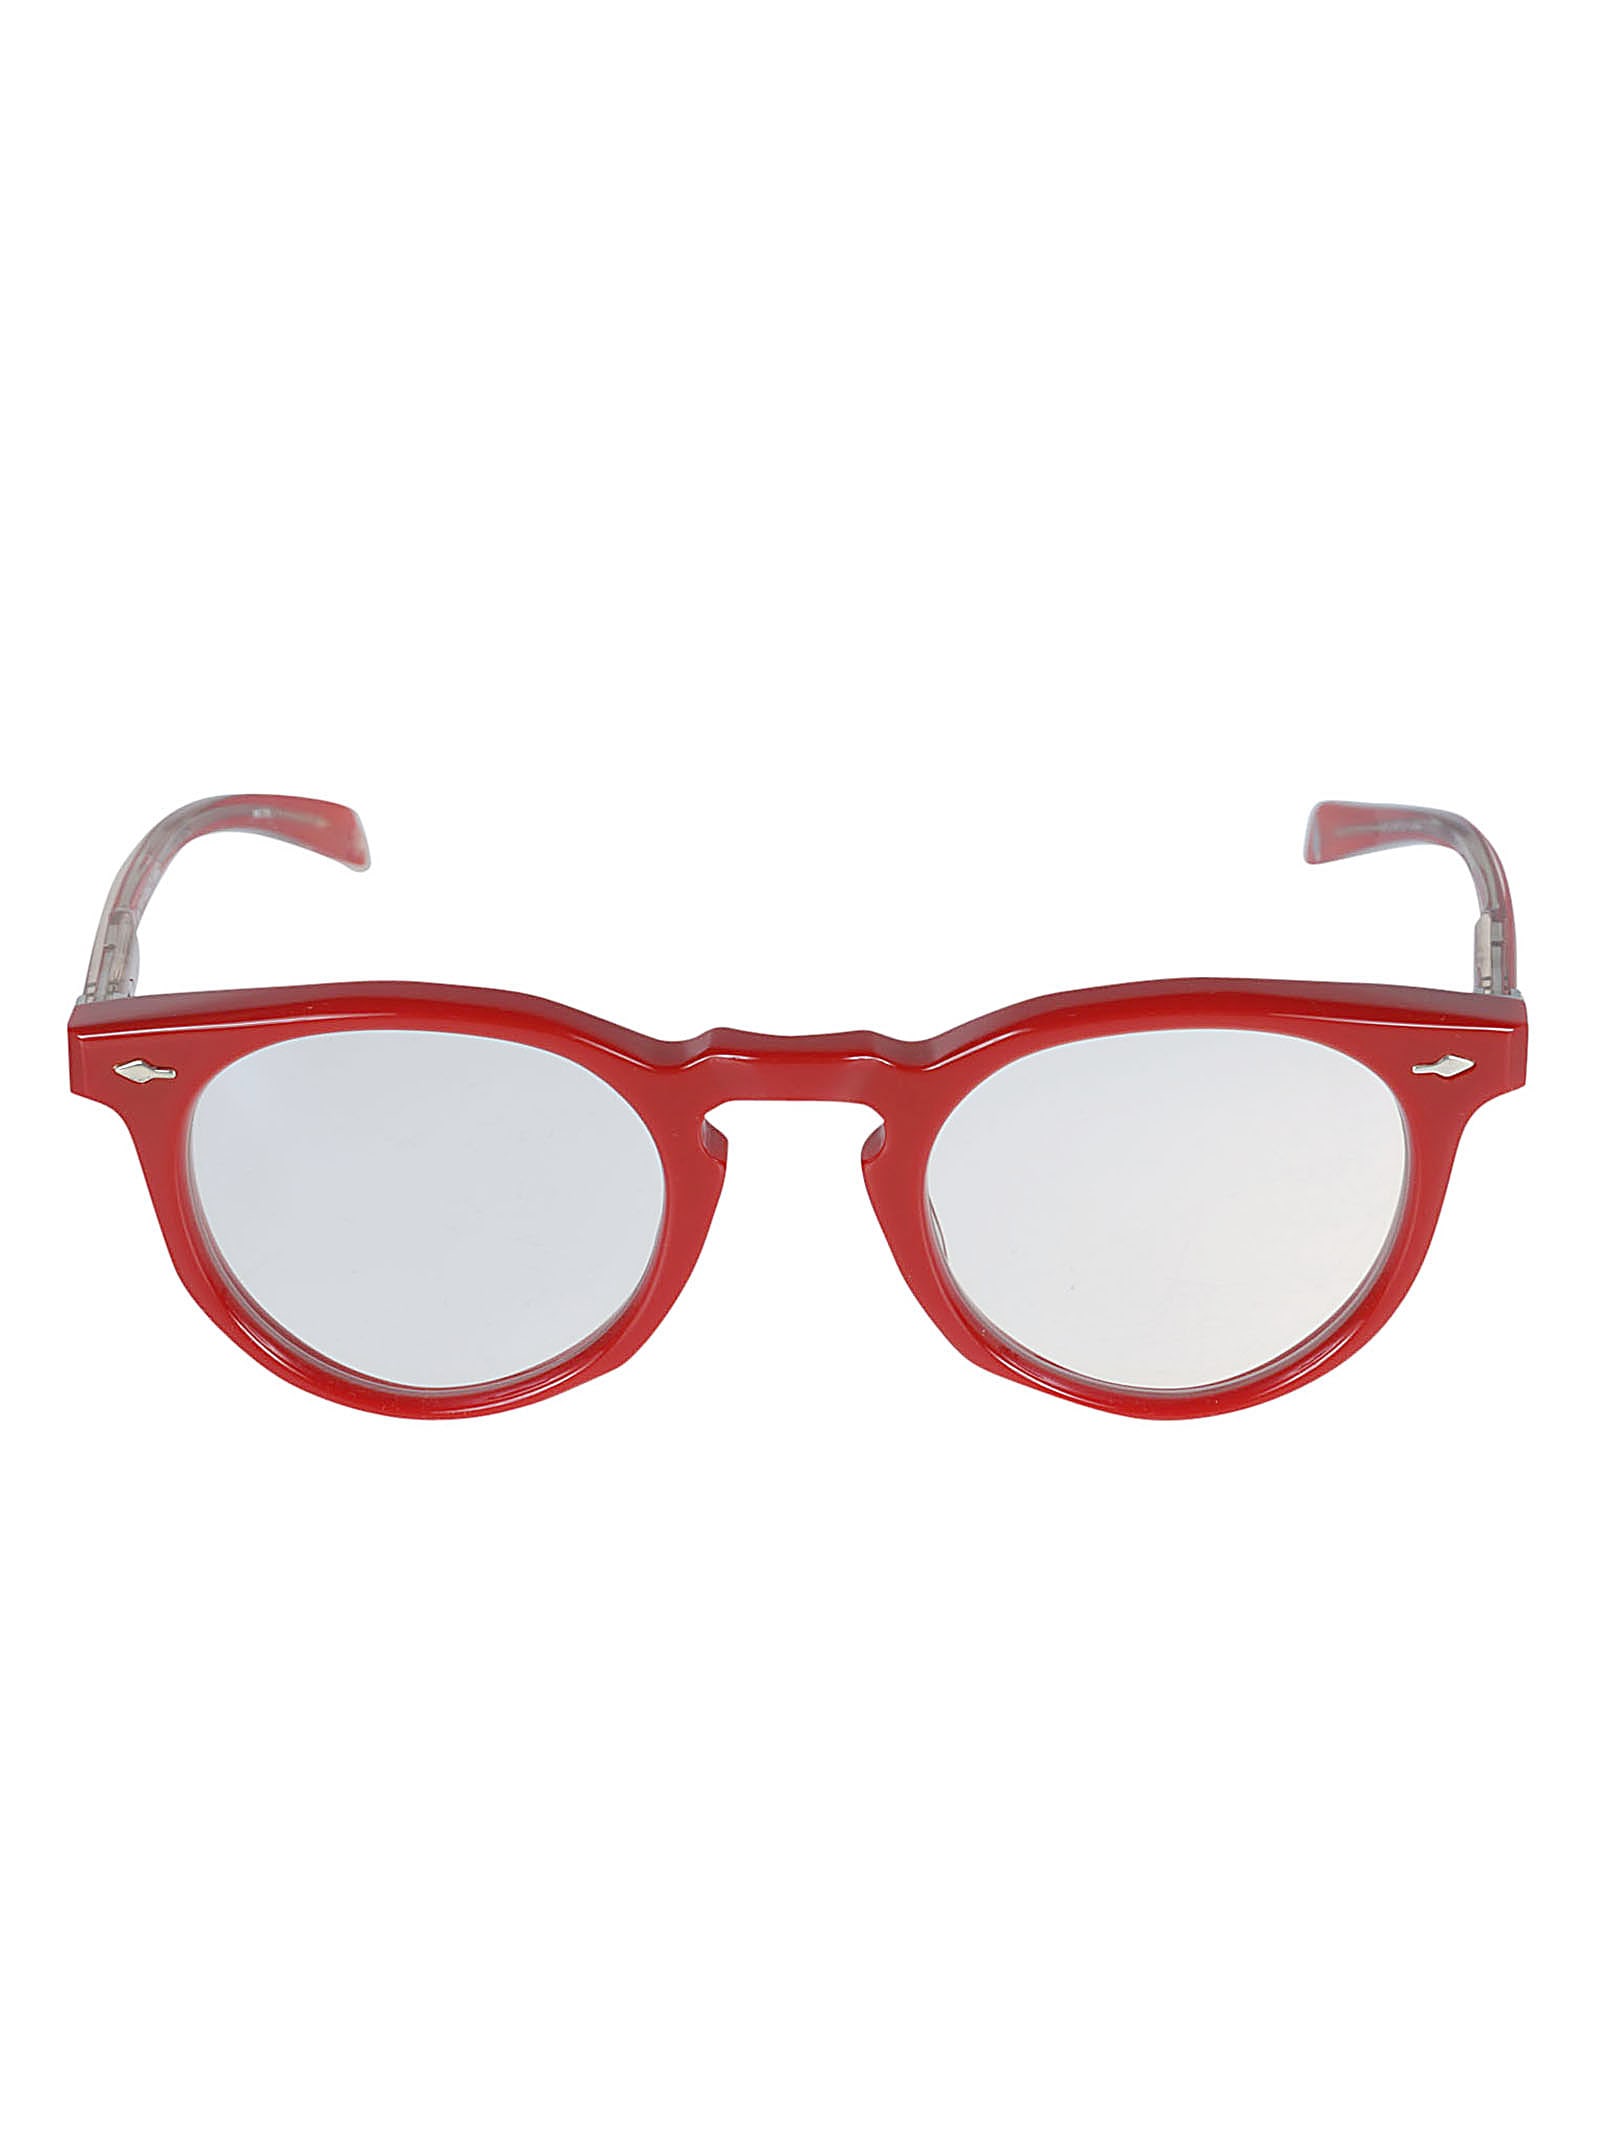 Jacques Marie Mage Classic Glasses In Vermillion